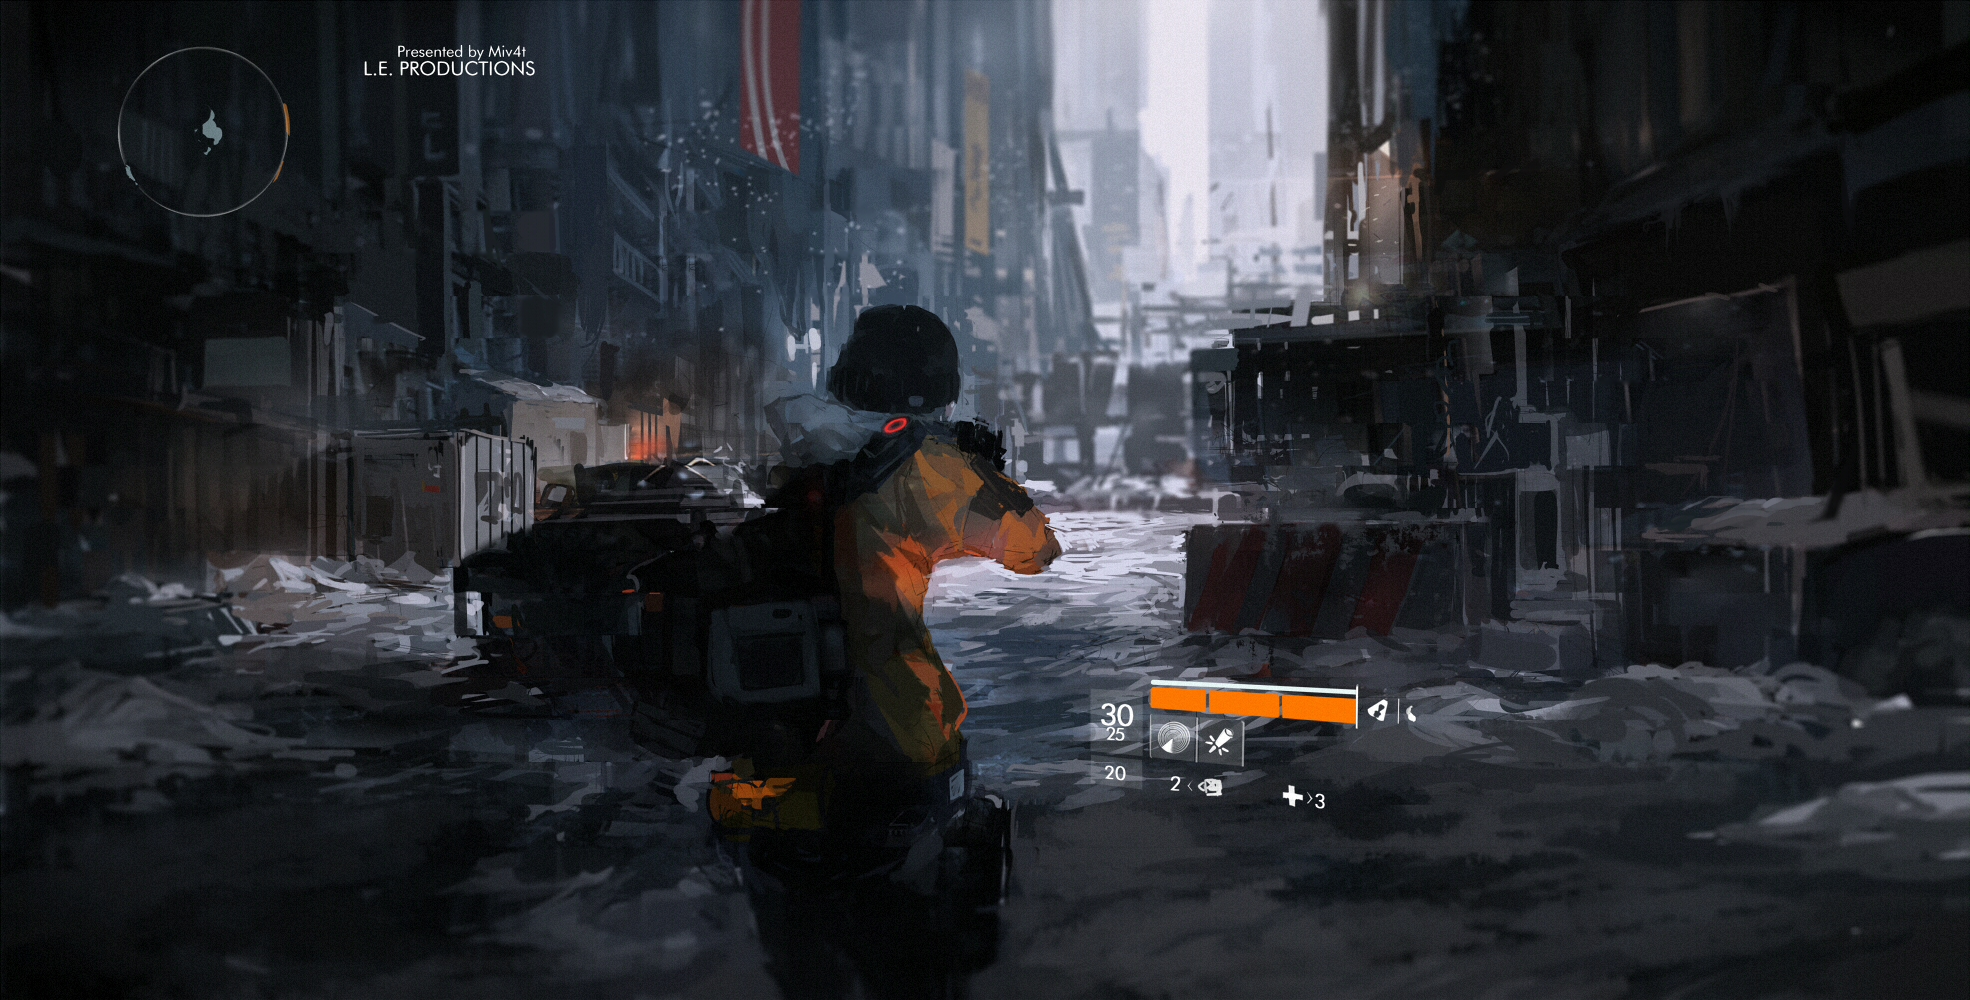 Anime Anime Girls Tom Clancys The Division Miv4t 1970x1000